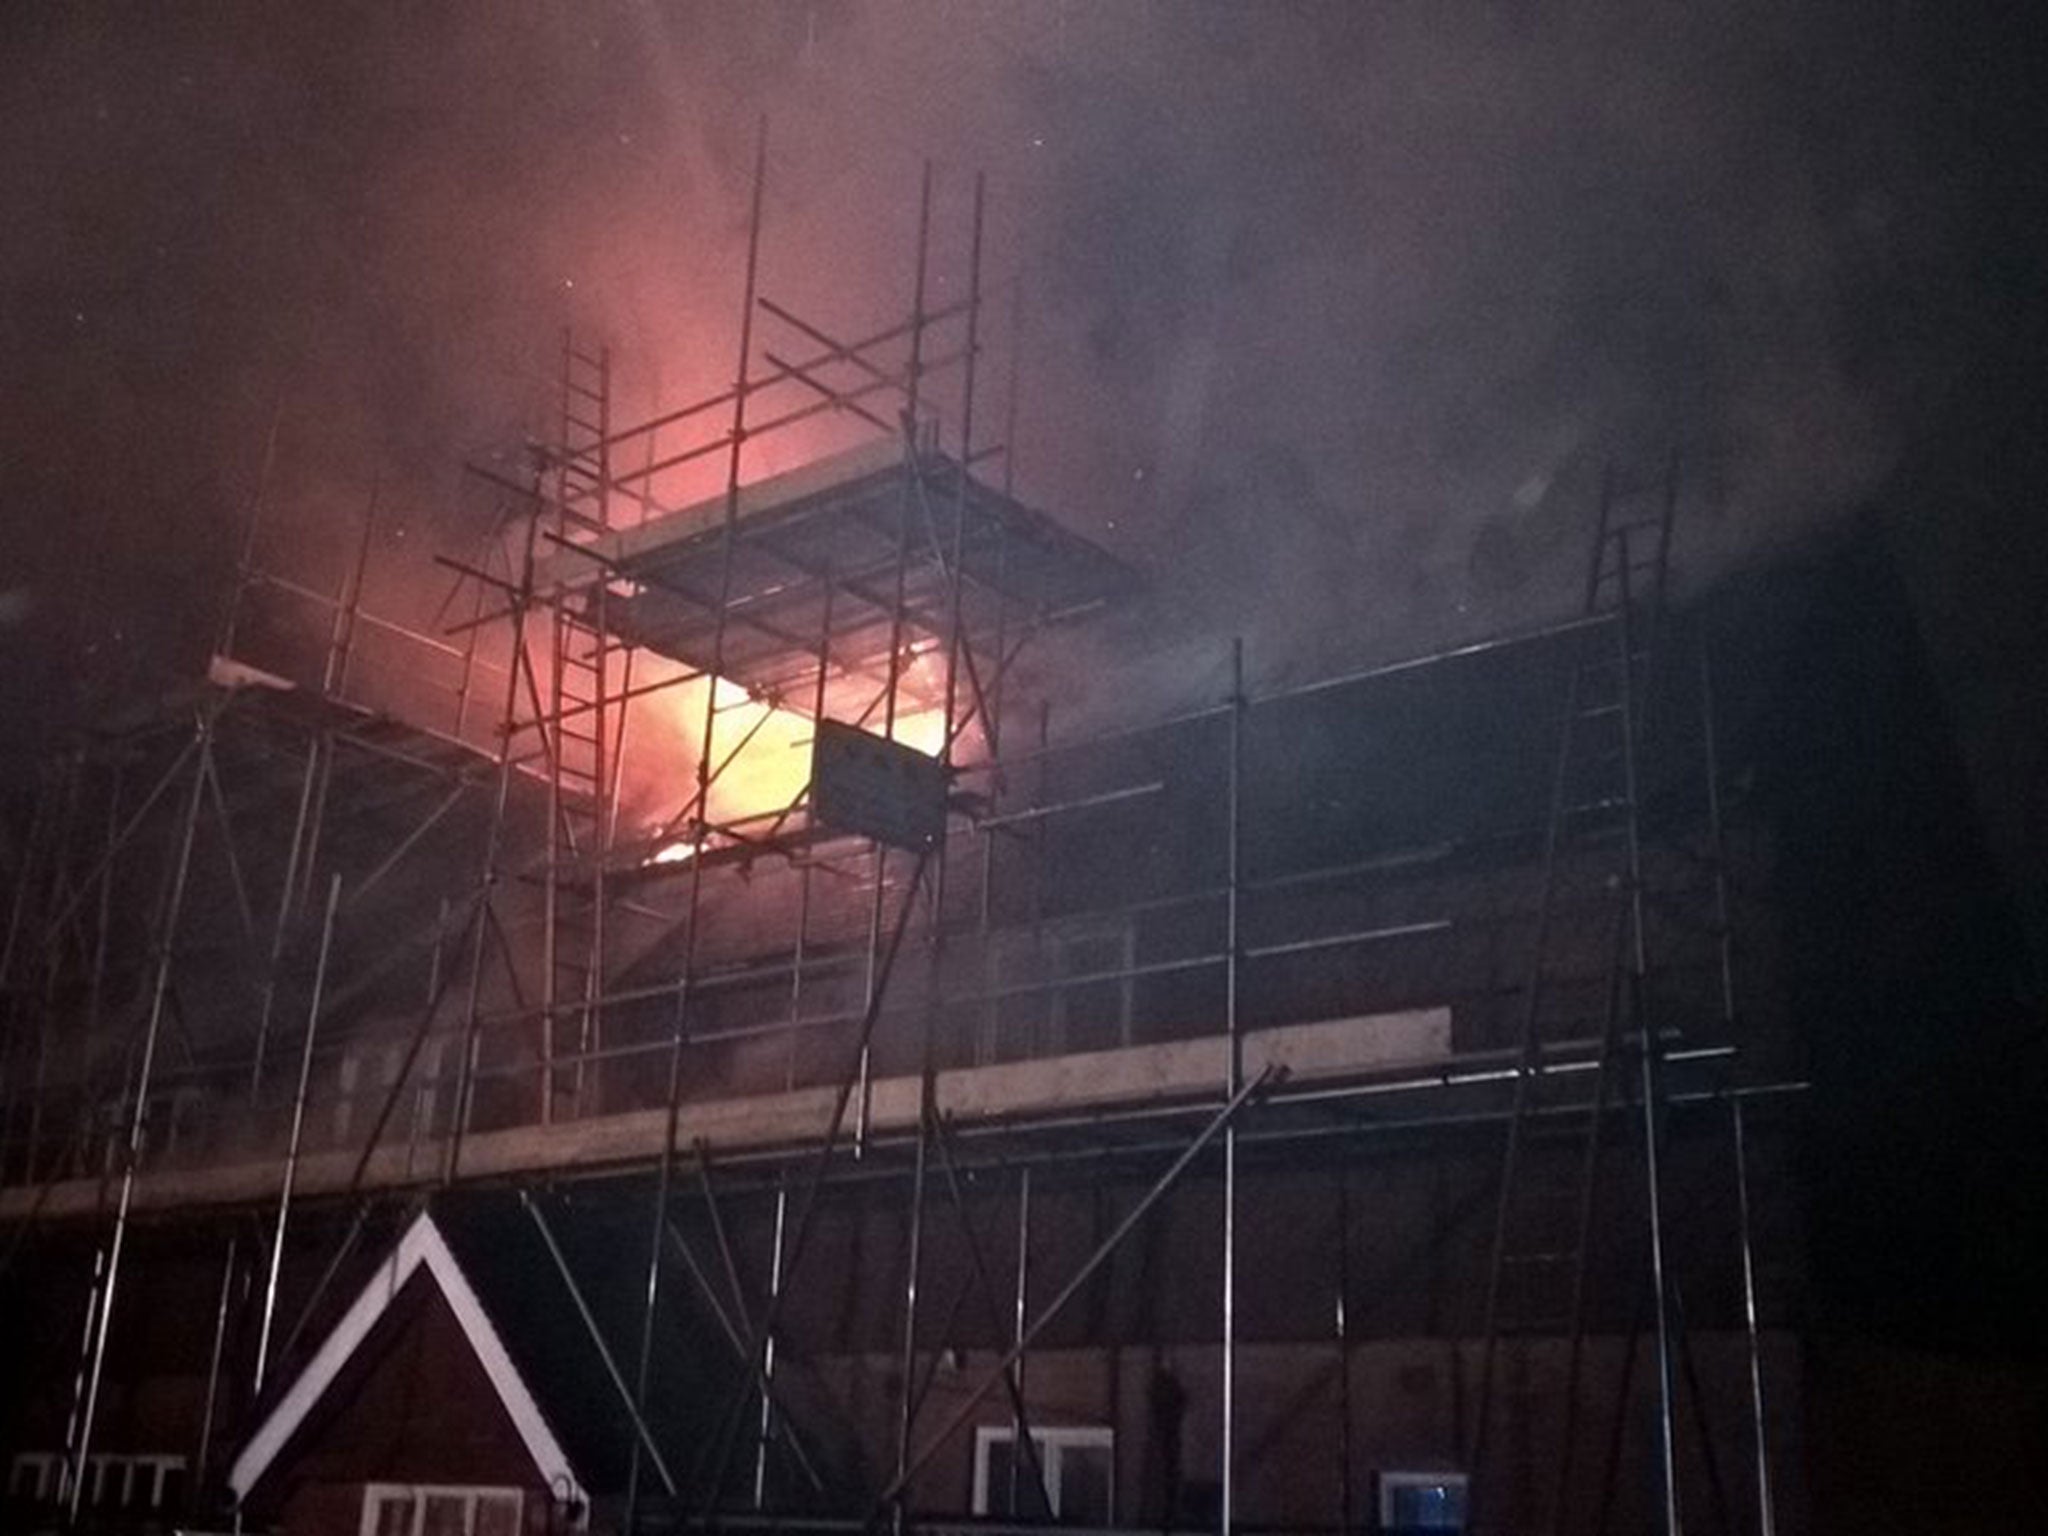 The whole of the house's roof and the first floor are alight